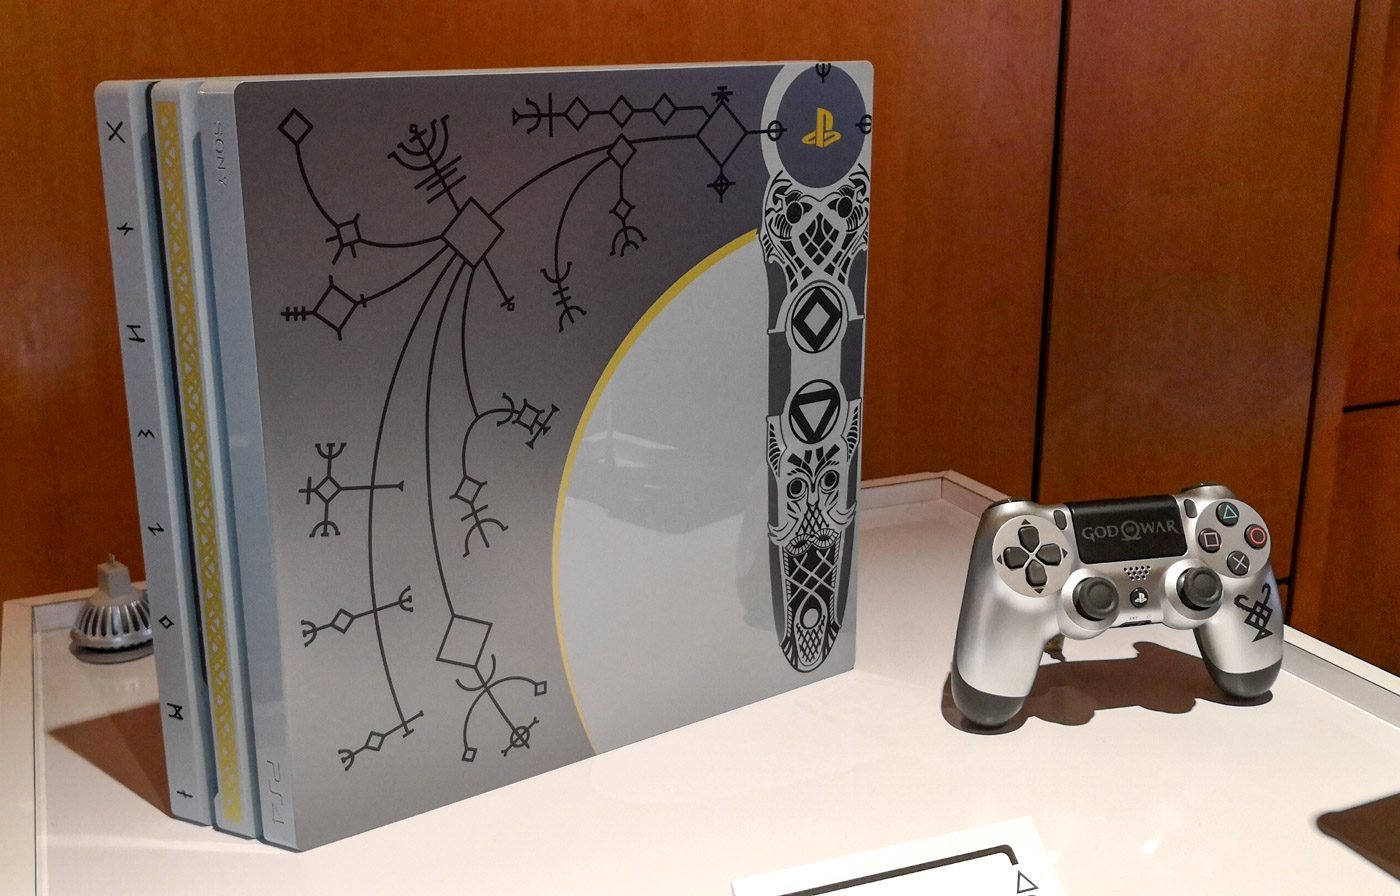 The ‘God of War’ PS4 Pro and the meanings behind the markings